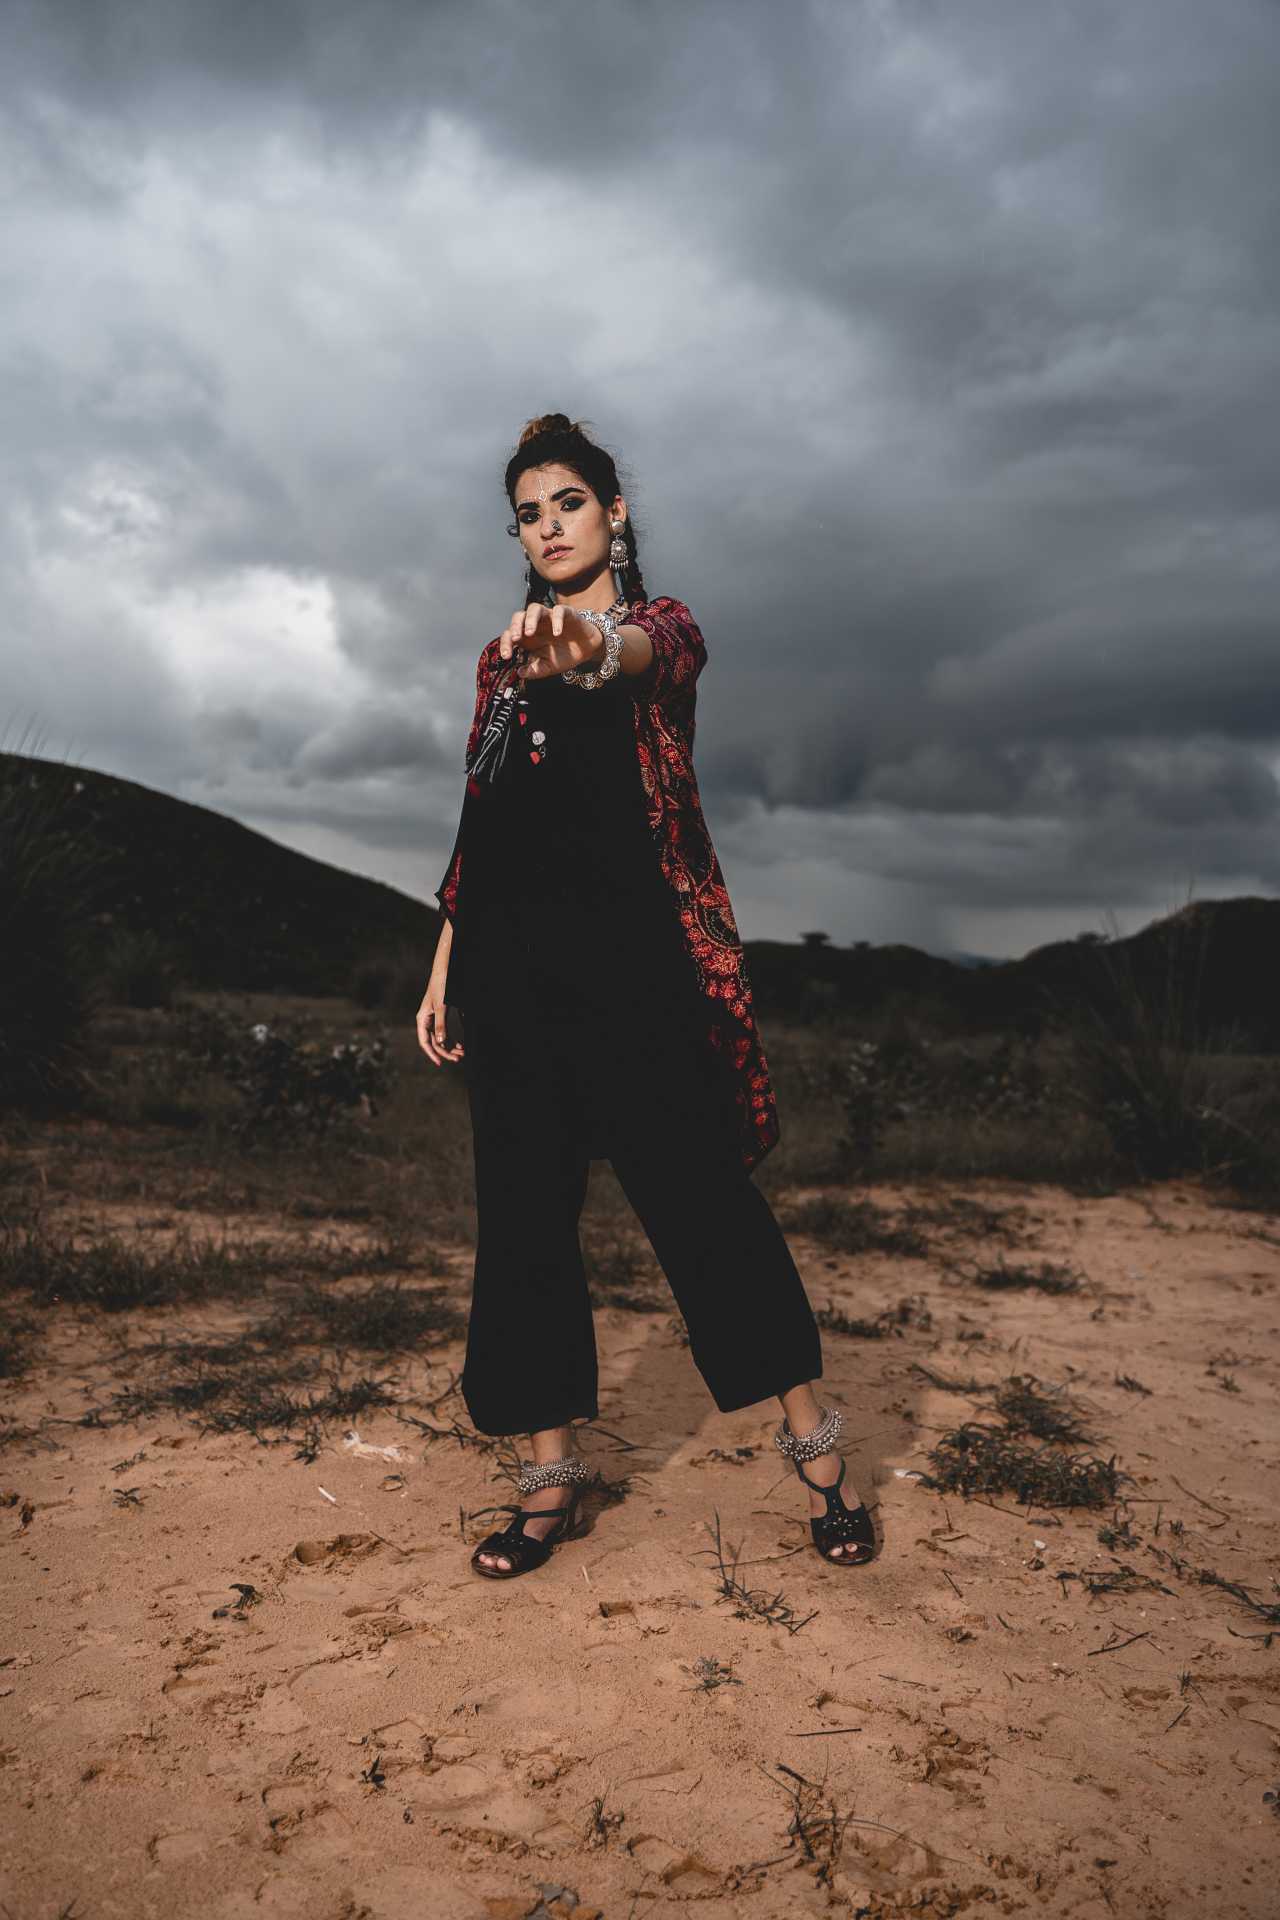 Black Cotton Top With Maroon Hand Block Printed Jacket And Pants - Set Of 3 at Kamakhyaa by Keva. This item is Black, Block Prints, Co-ord Sets, Cotton, Natural, Relaxed Fit, Resort Wear, Travel, Travel Co-ords, Wild Child, Womenswear